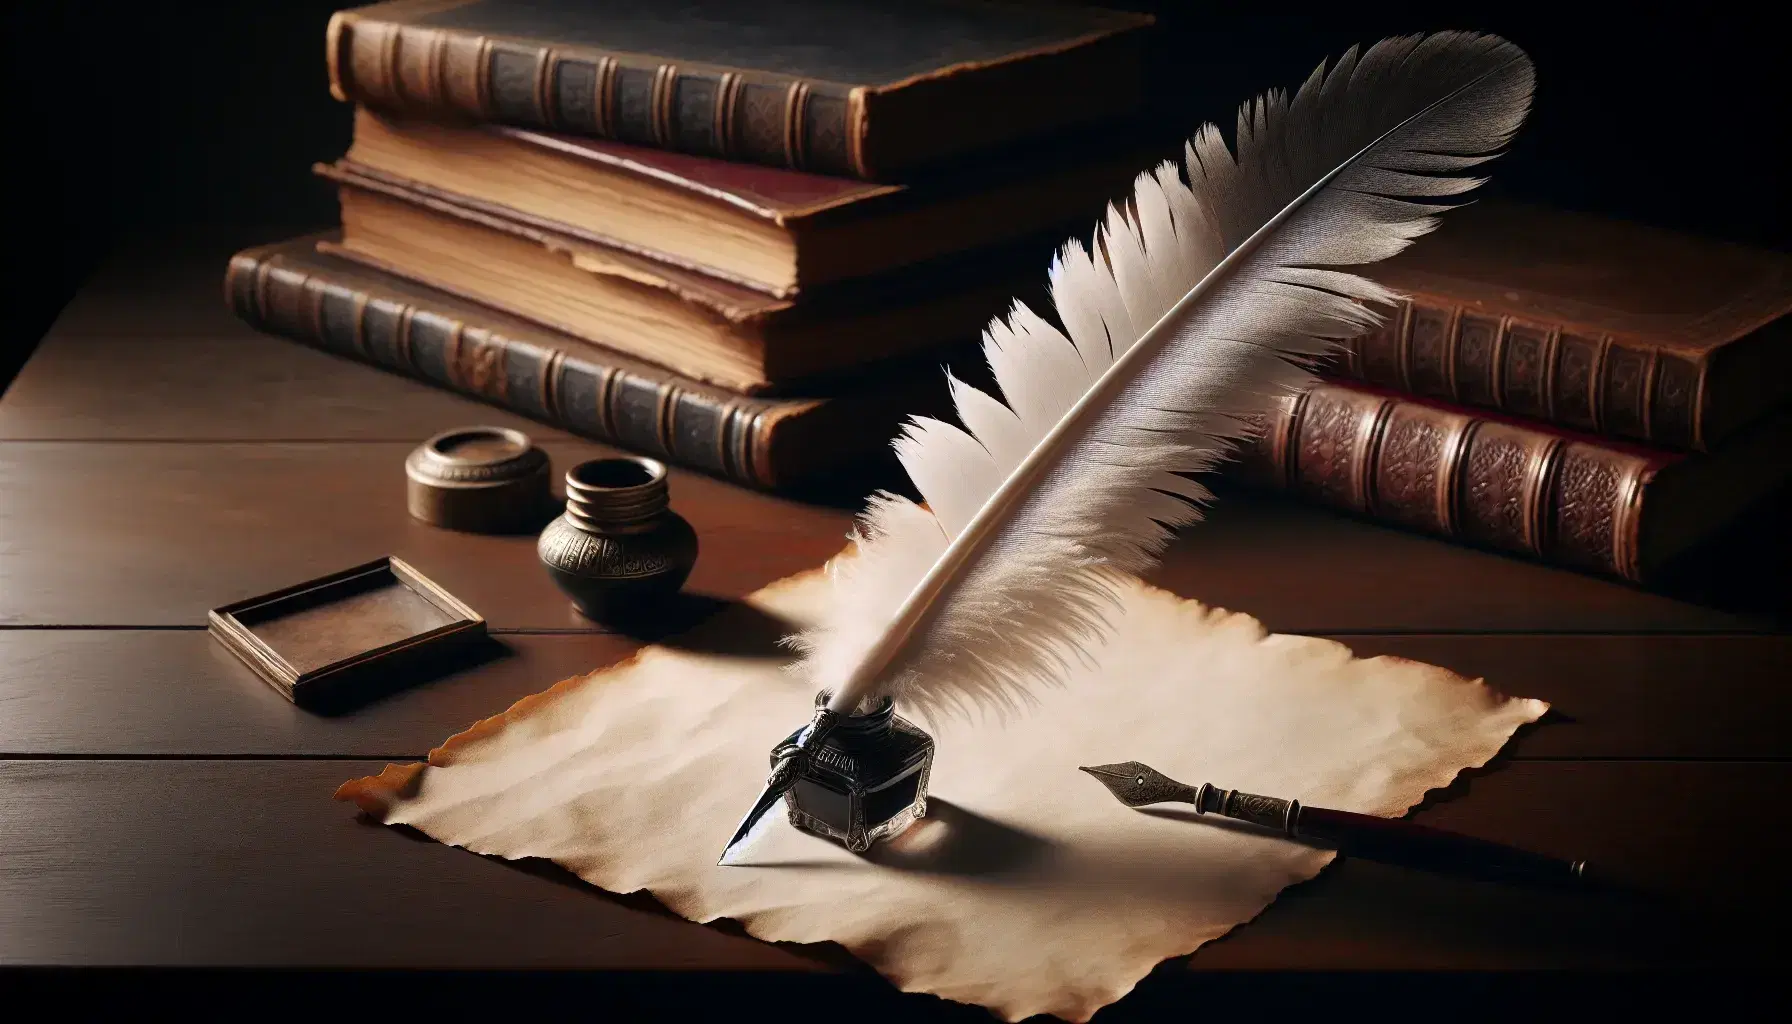 Vintage quill pen on blank parchment with brass inkwell on a dark wooden desk, beside out-of-focus leather-bound books, in a warm-lit, studious setting.